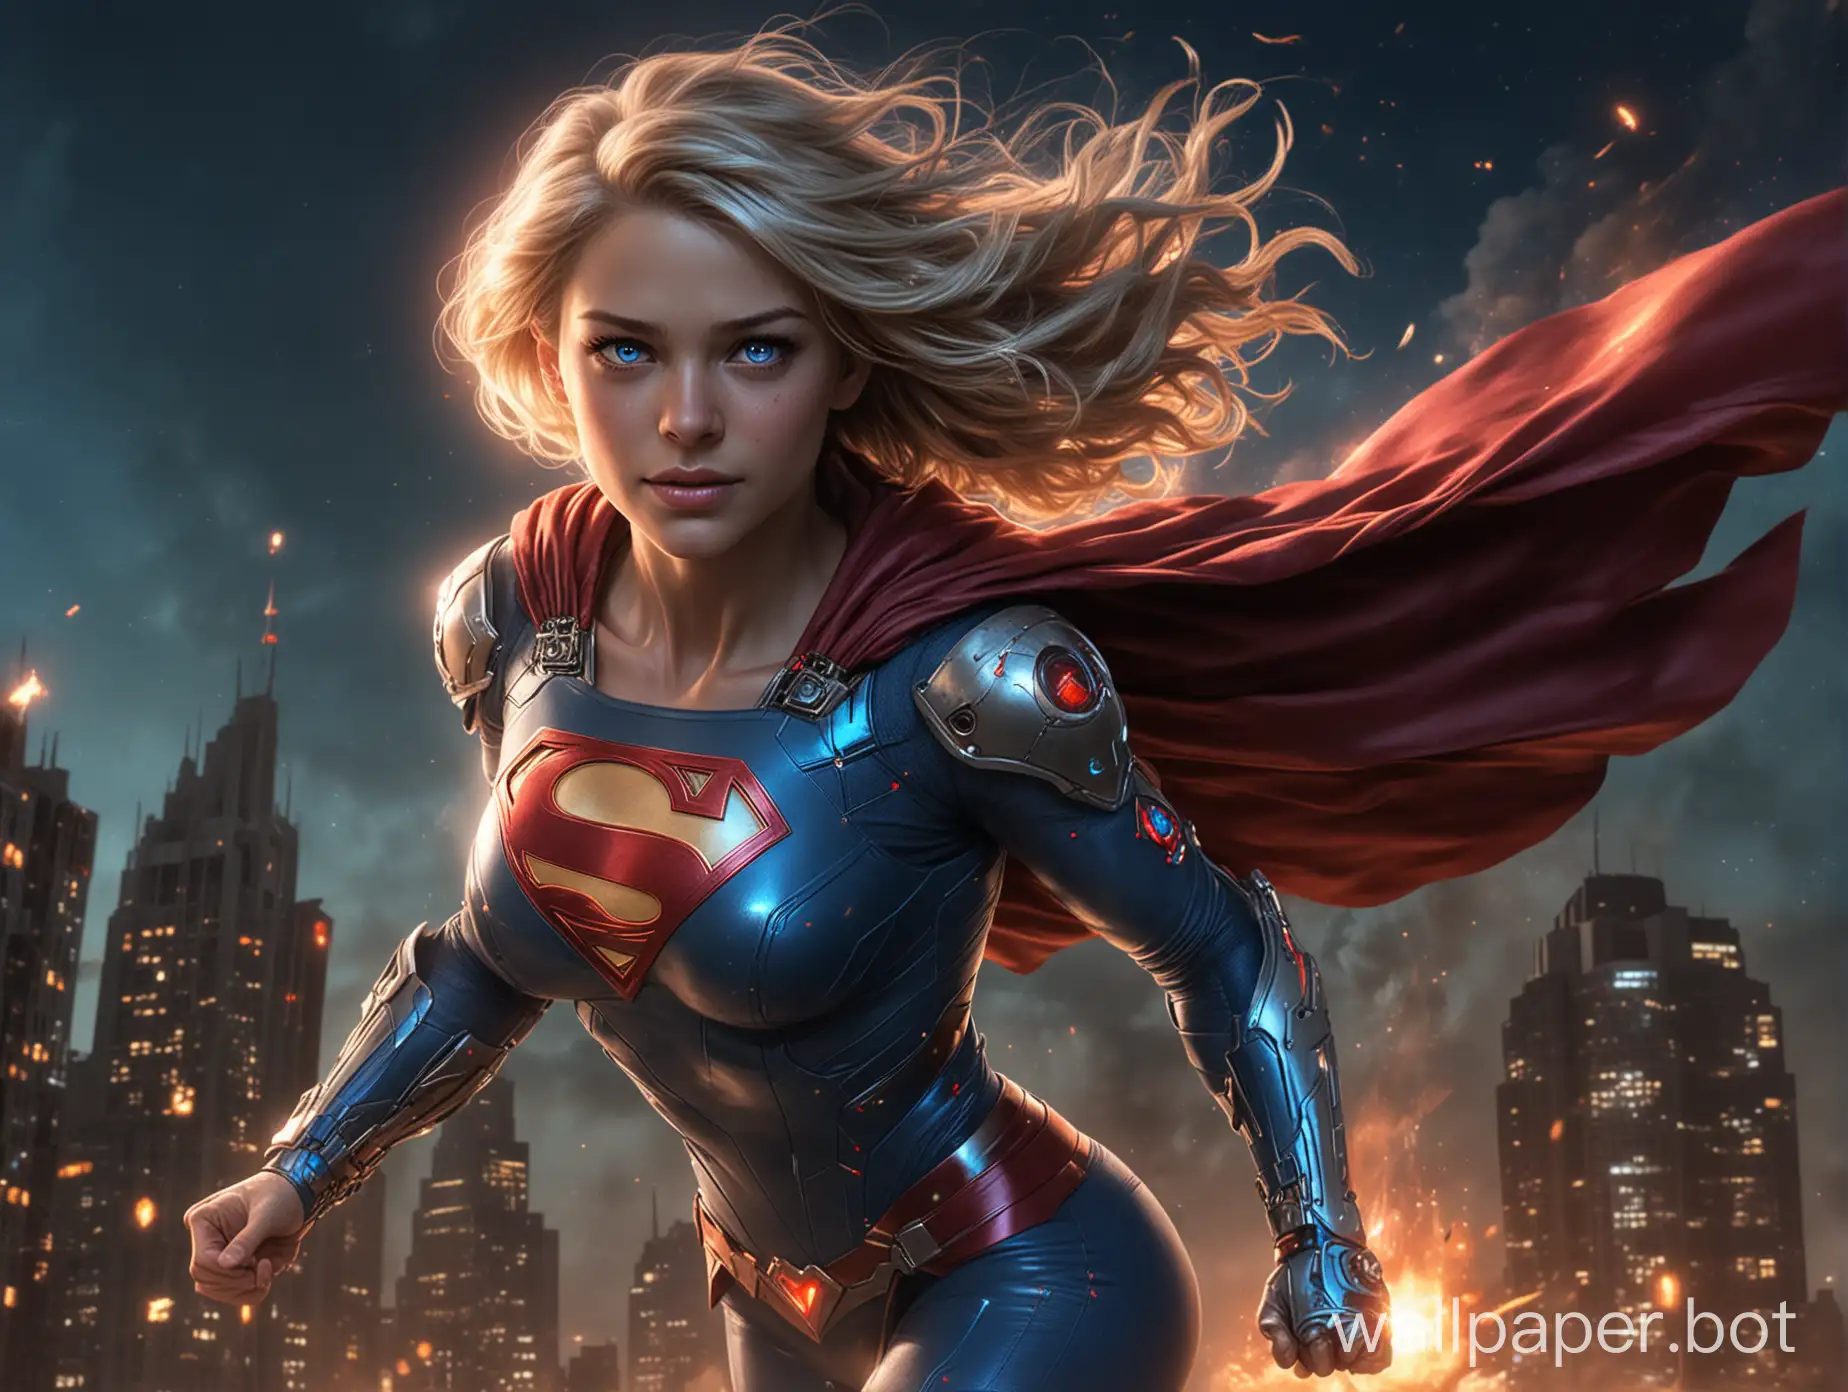 supergirl cyborg flies in the night sky above the city, shining bright blue eyes, big breast, hair on fire, full height